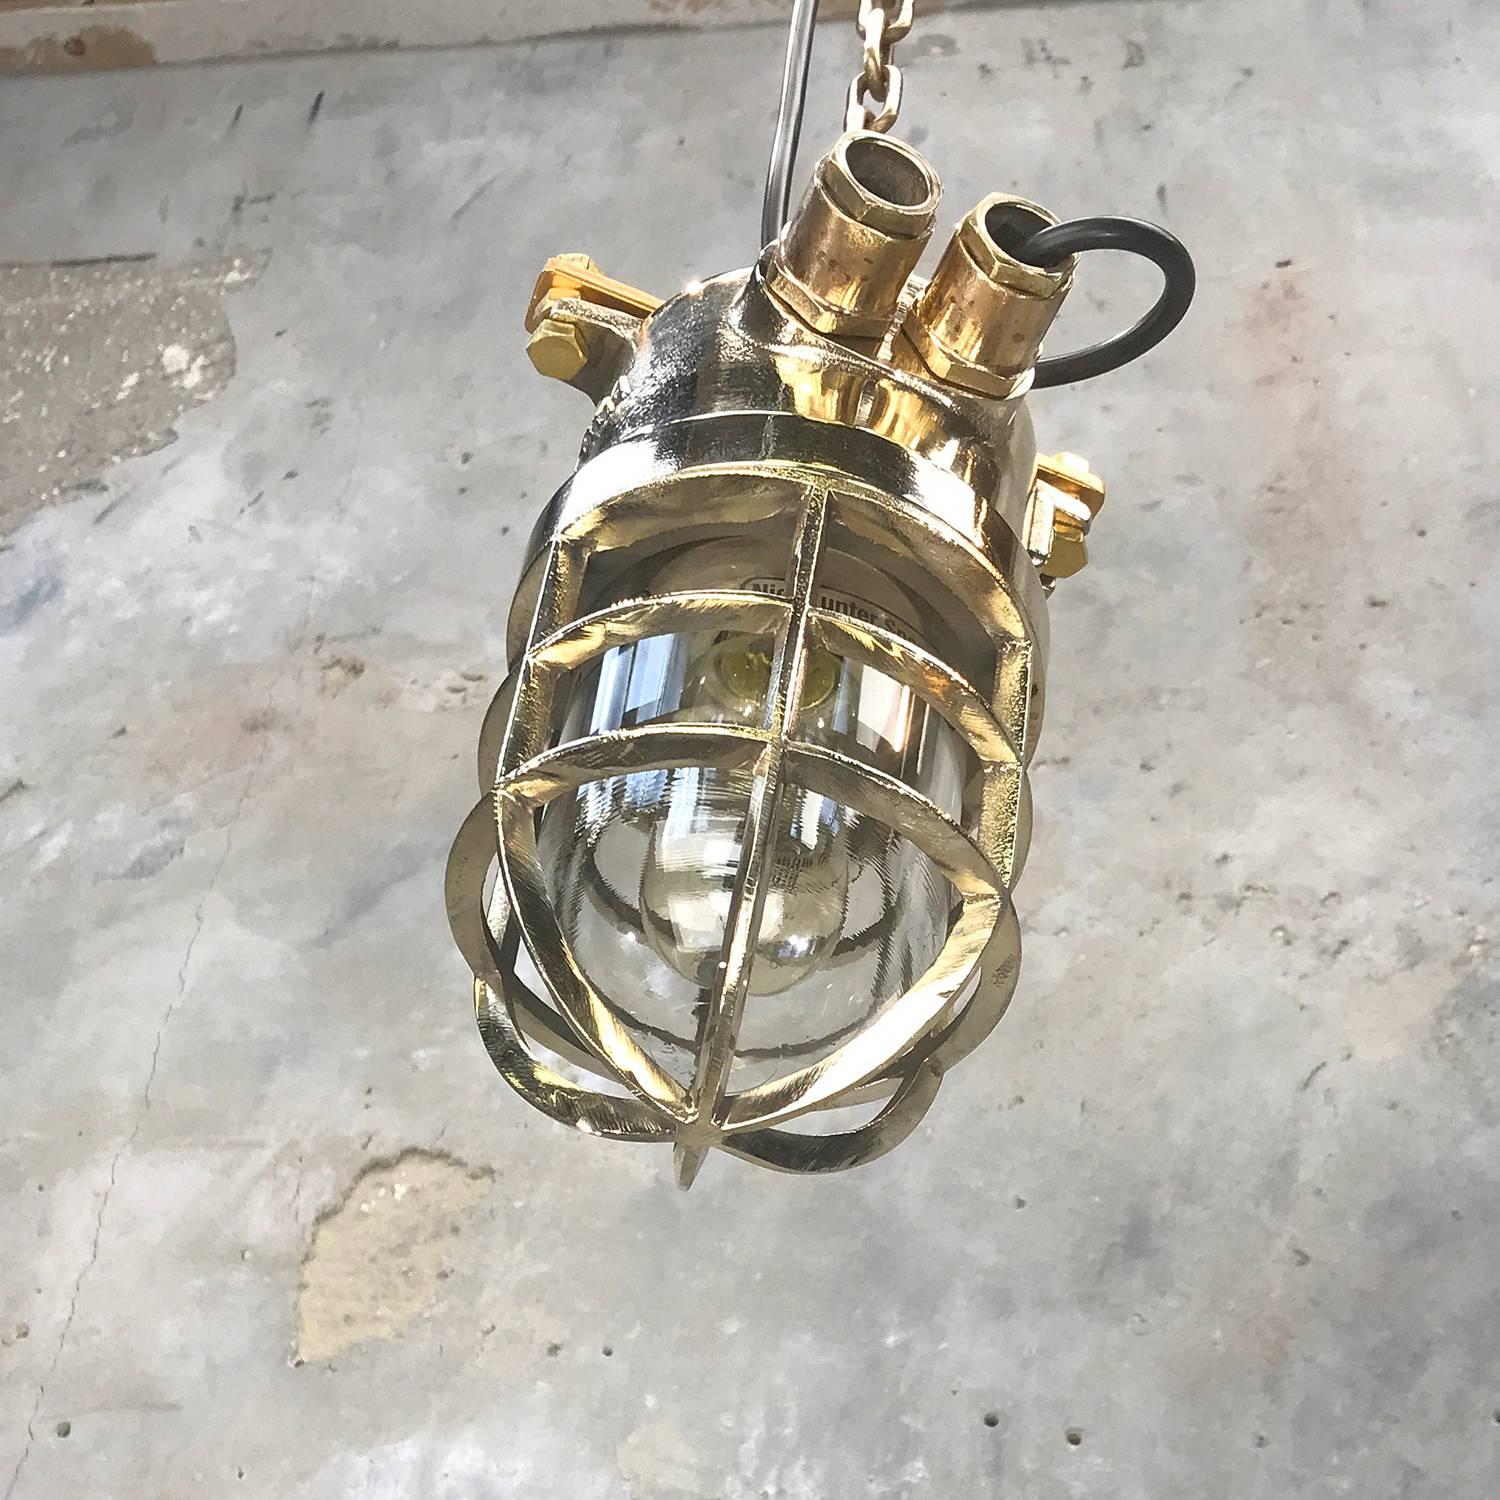 Late Century German Cast Brass and Glass Shade Explosion Proof Pendant Light For Sale 3